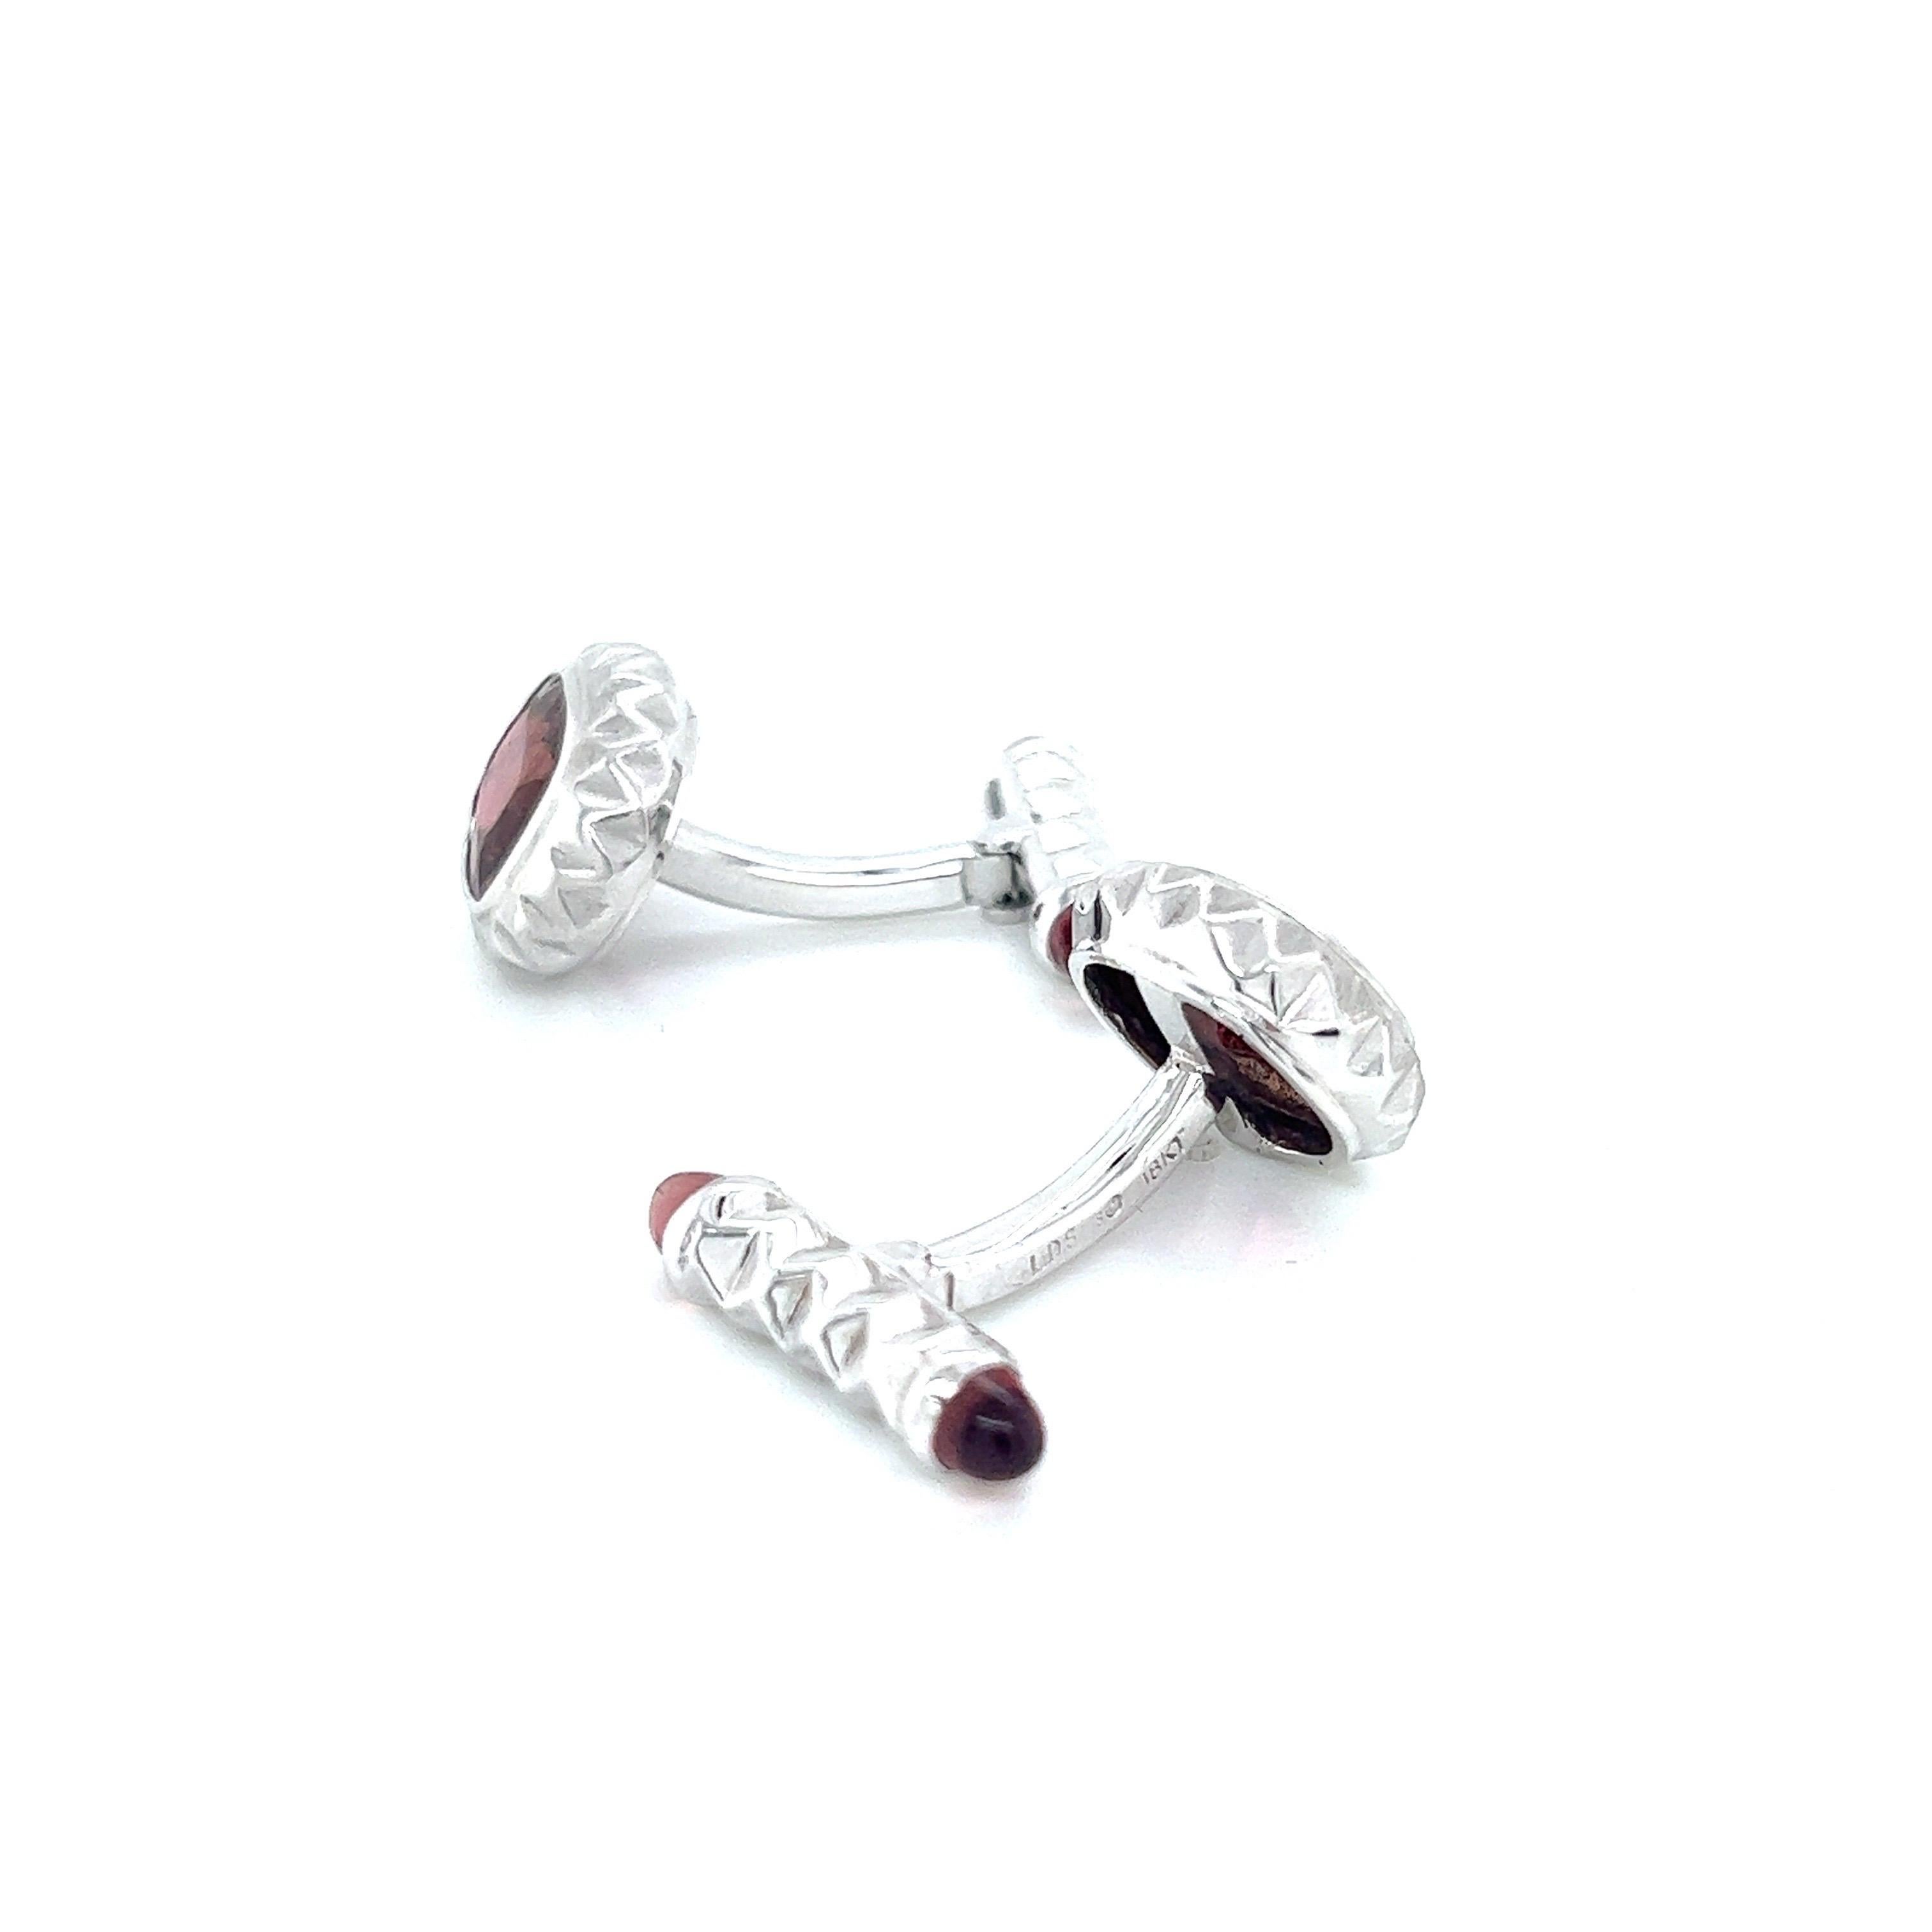 18k white gold cufflinks with cushion cut pink tourmaline center and pink tourmaline bullets in the back are a beautiful and luxurious accessory that adds a pop of color and elegance to any formal or semi-formal outfit. The cufflinks feature a